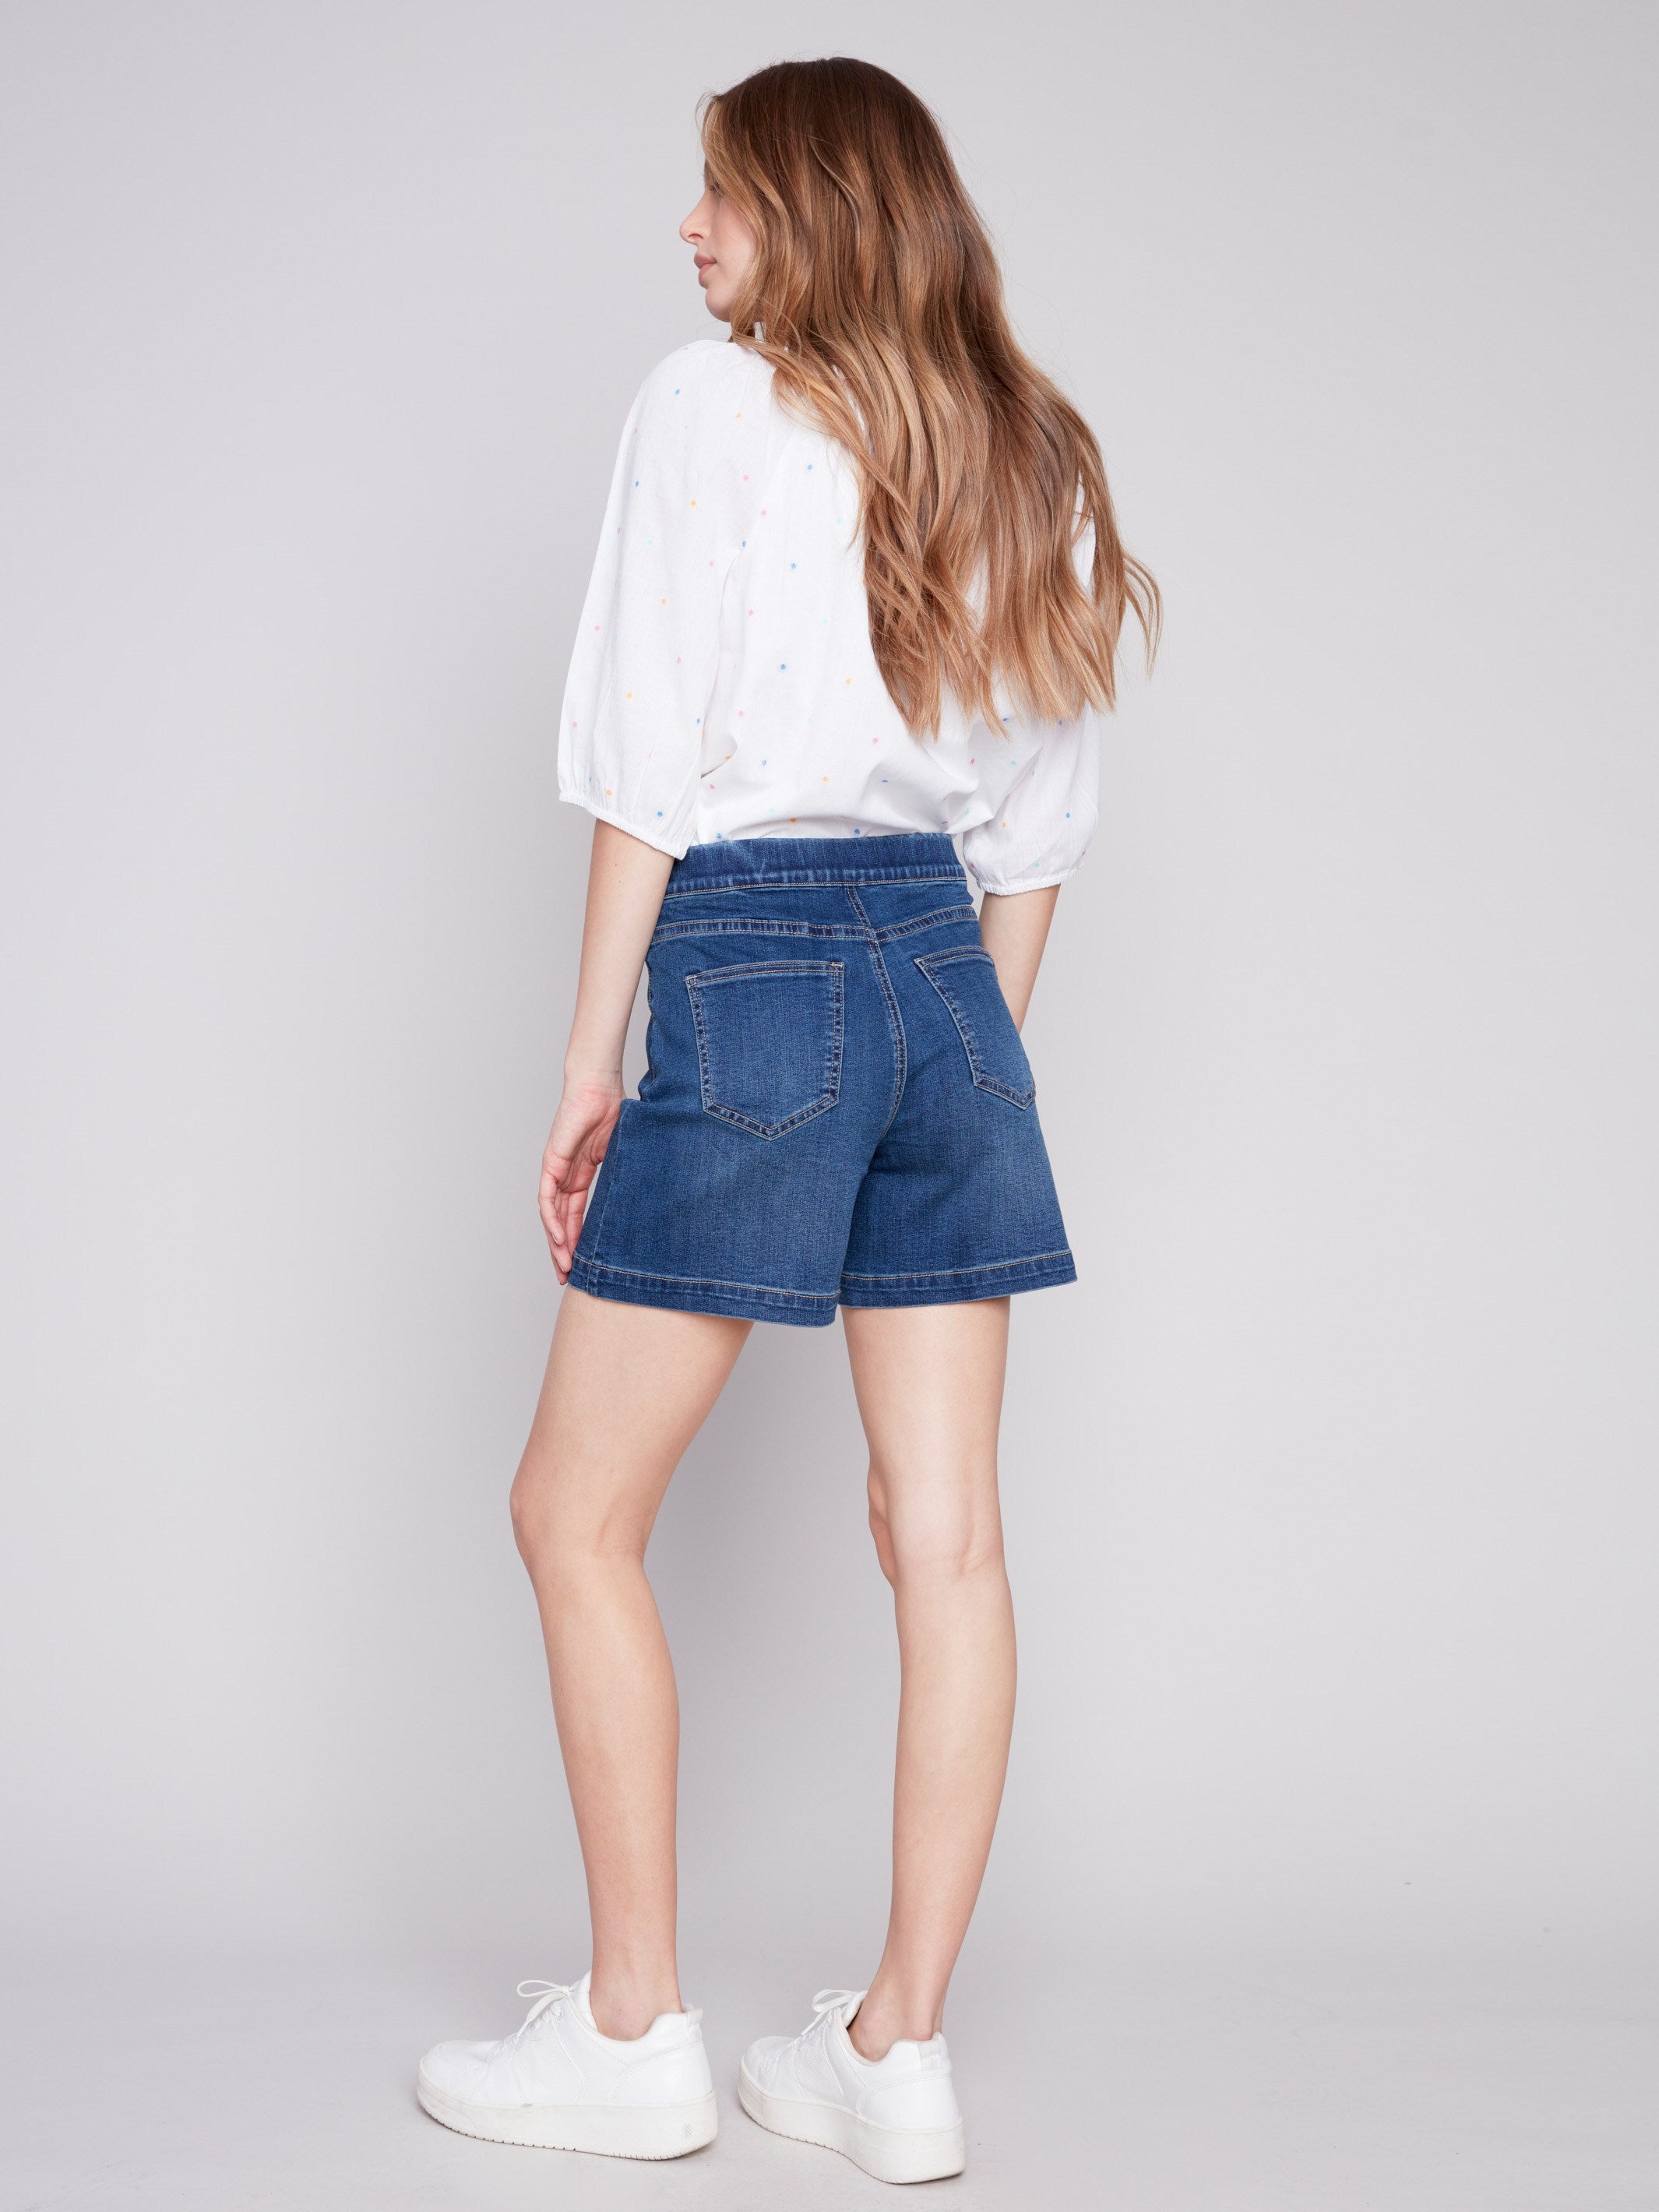 Denim Shorts with Decorative Buttons - Indigo - Charlie B Collection Canada - Image 2